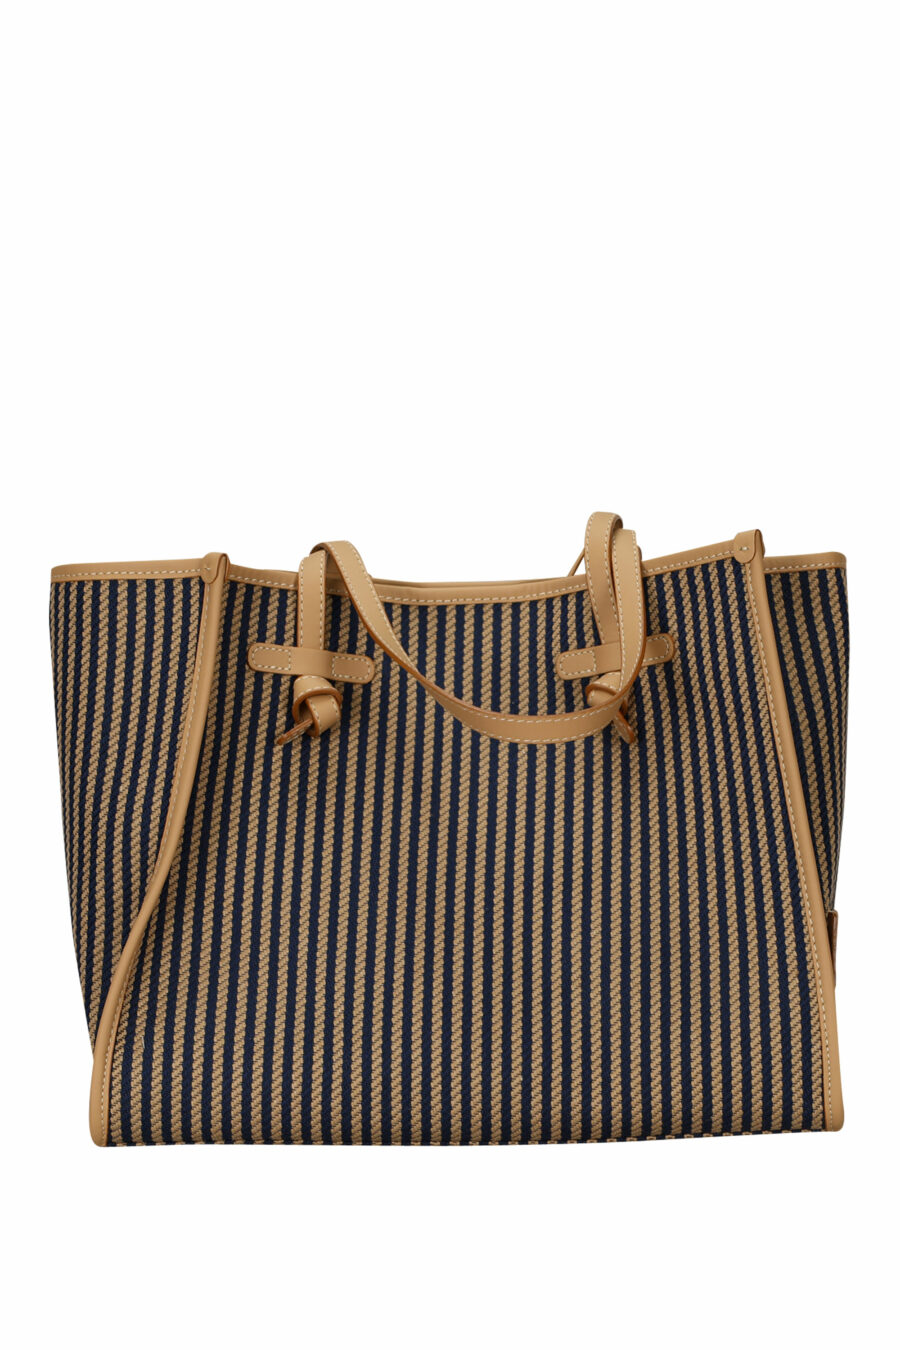 Shopper bag "Marcella" brown with dark blue lines and minilogo - 8057145894331